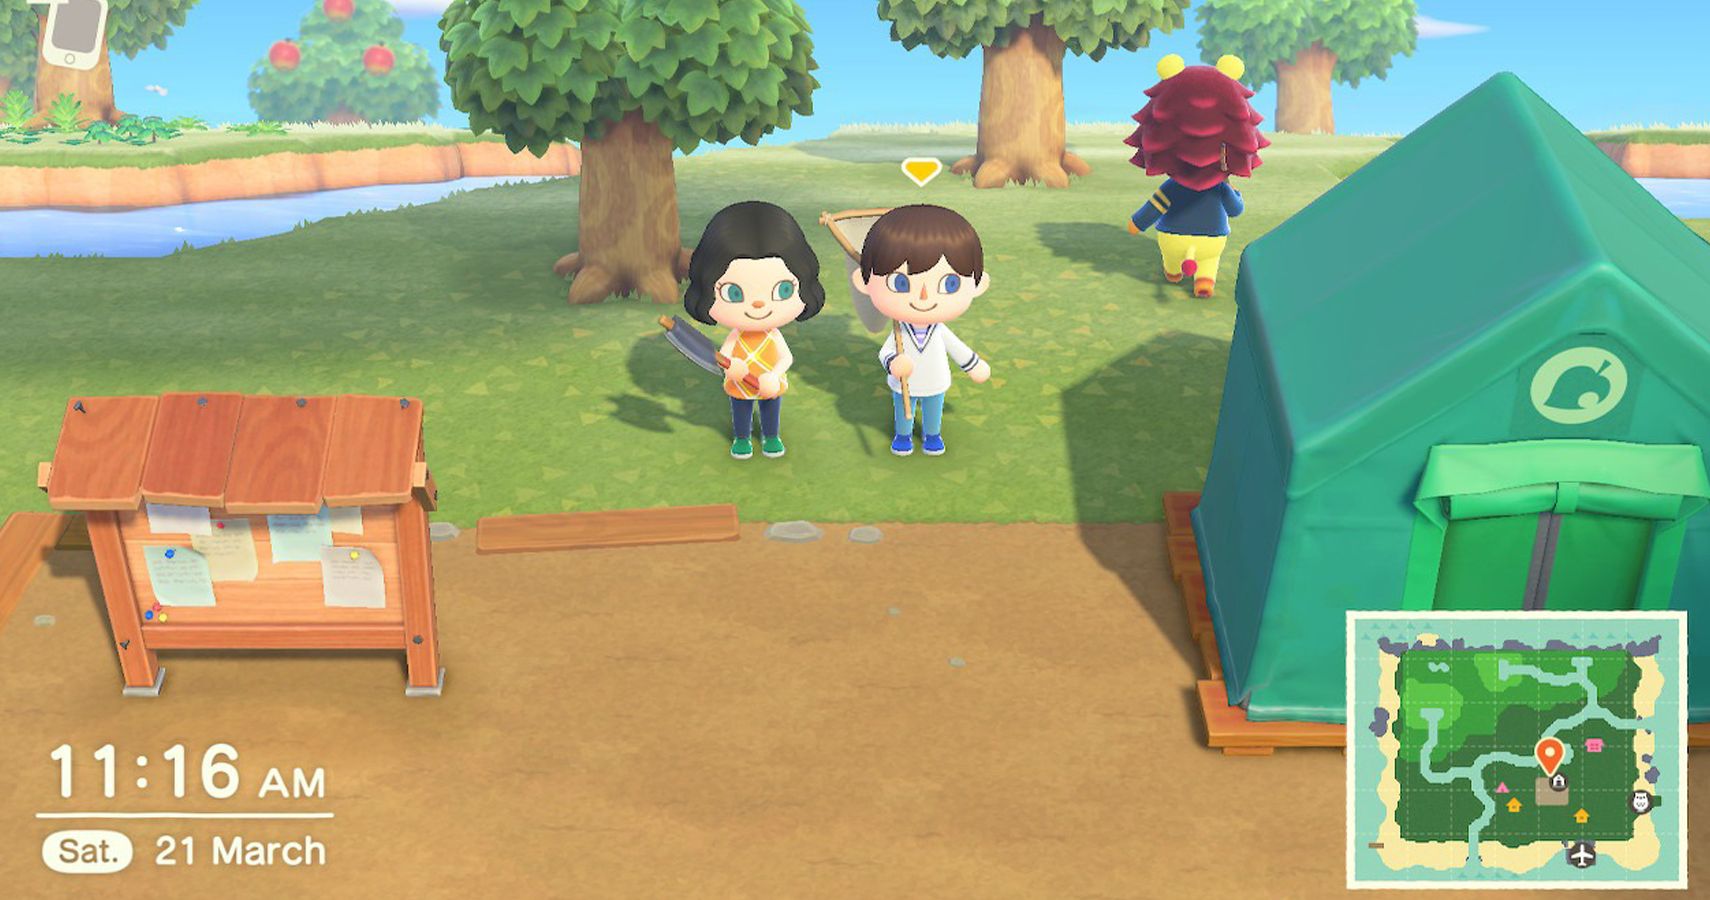 Helen and her sons animal crossing characters side by side